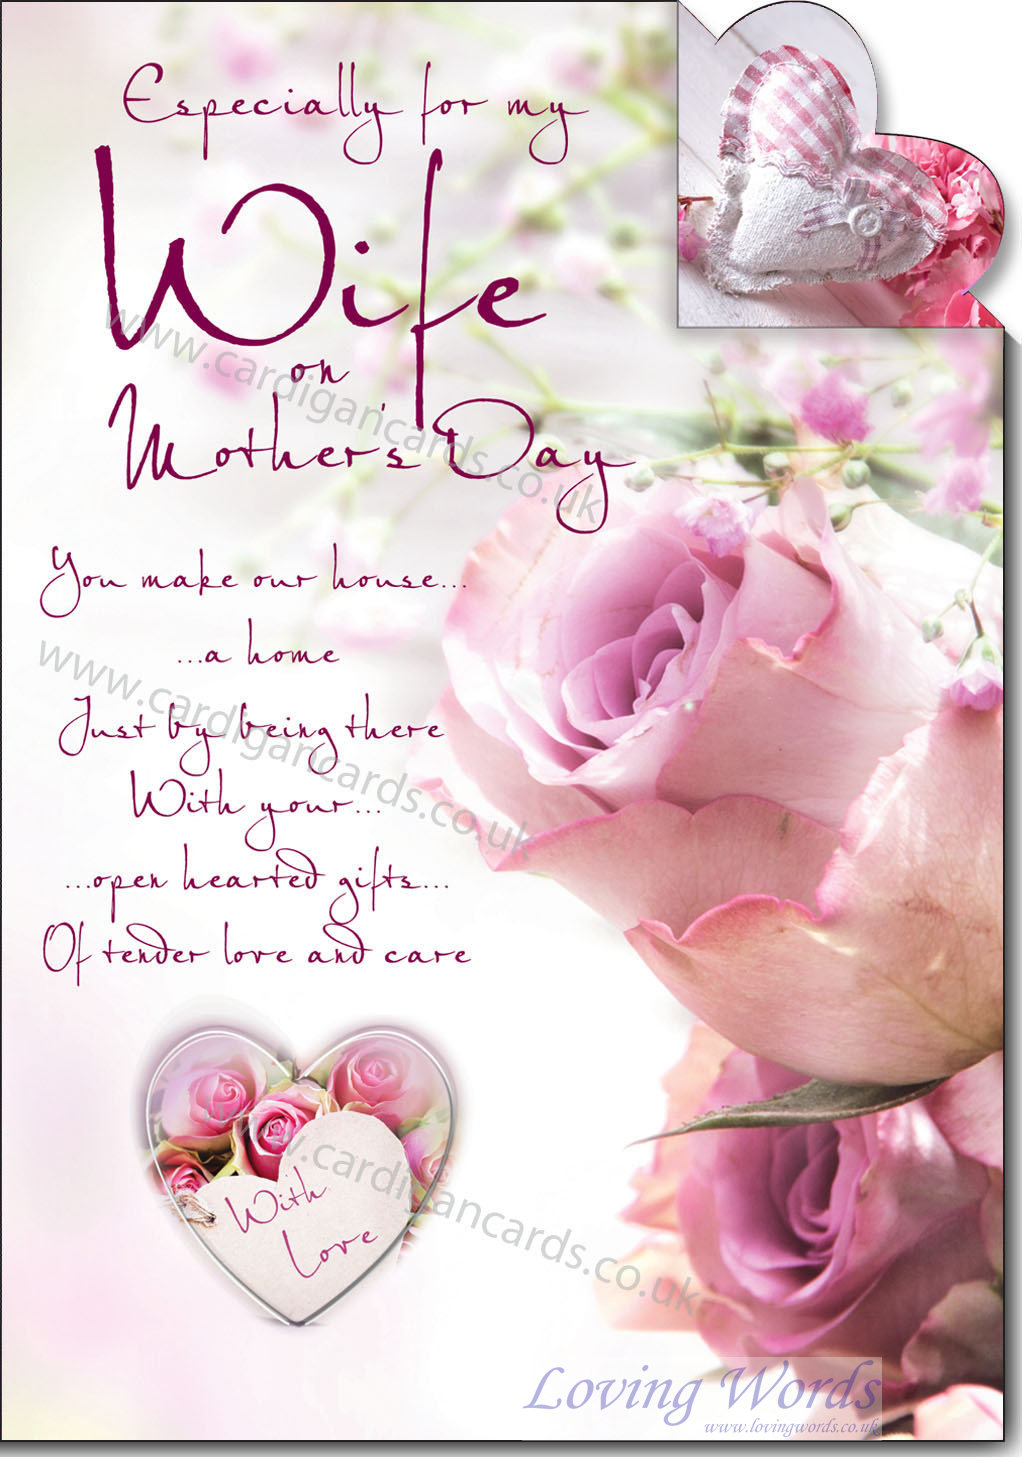 My Wife On Mother s Day Greeting Cards By Loving Words